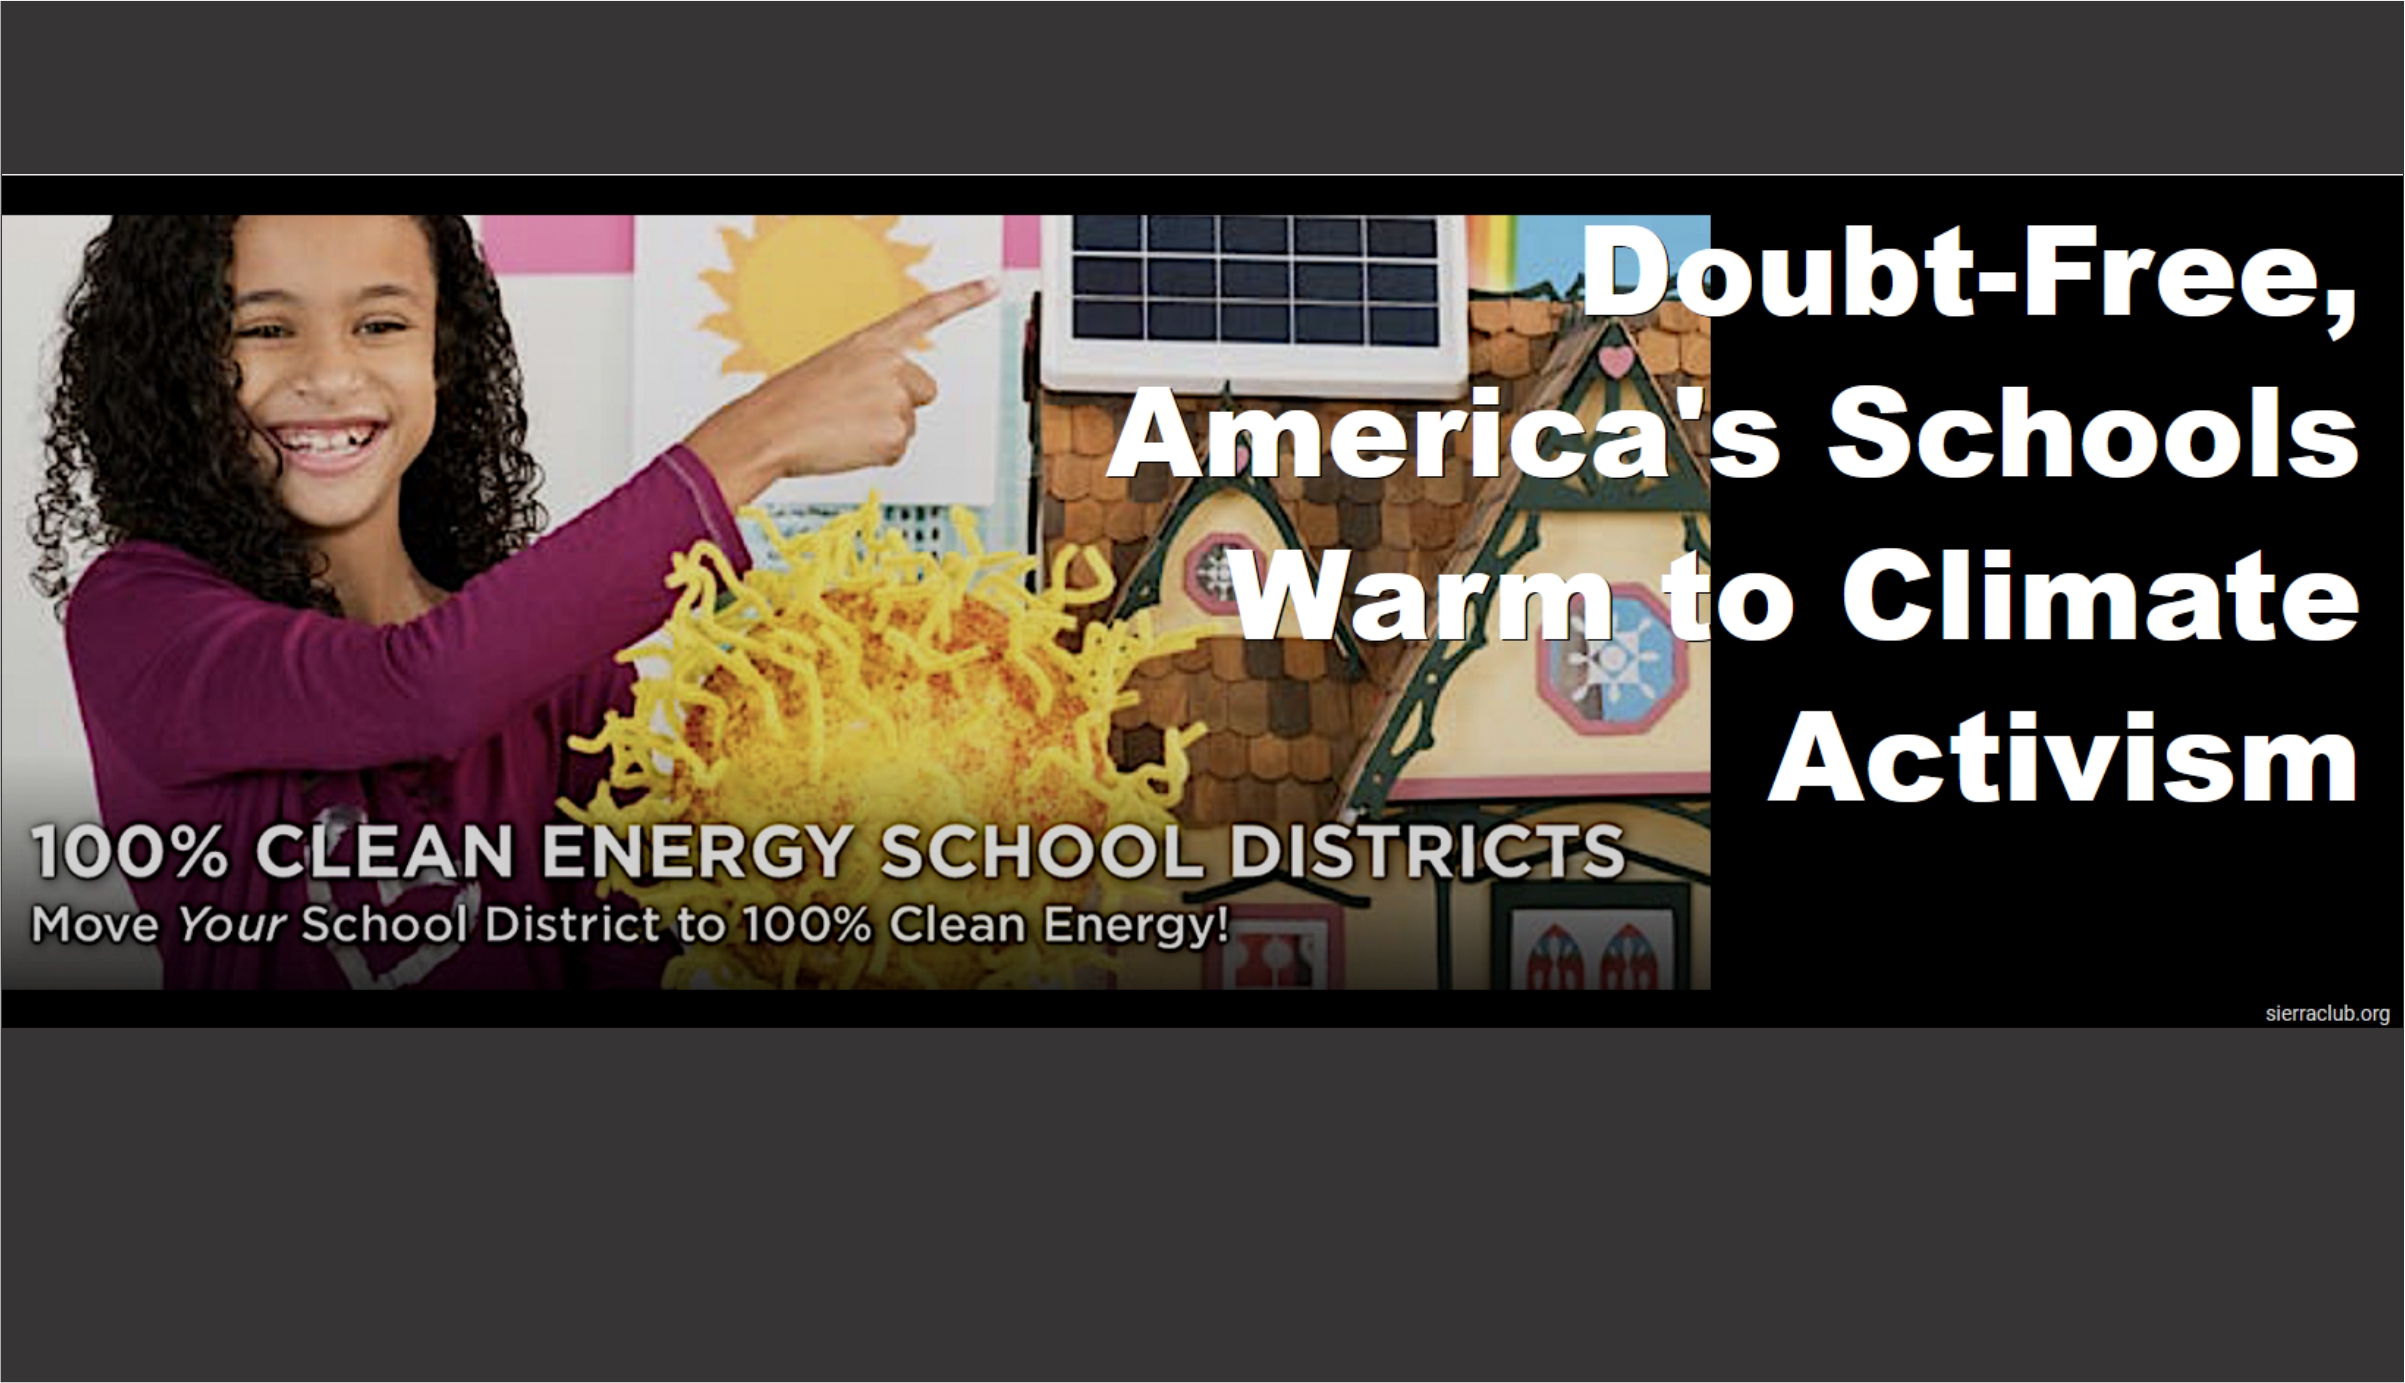 Doubt-free, America's schools warm to climate activism